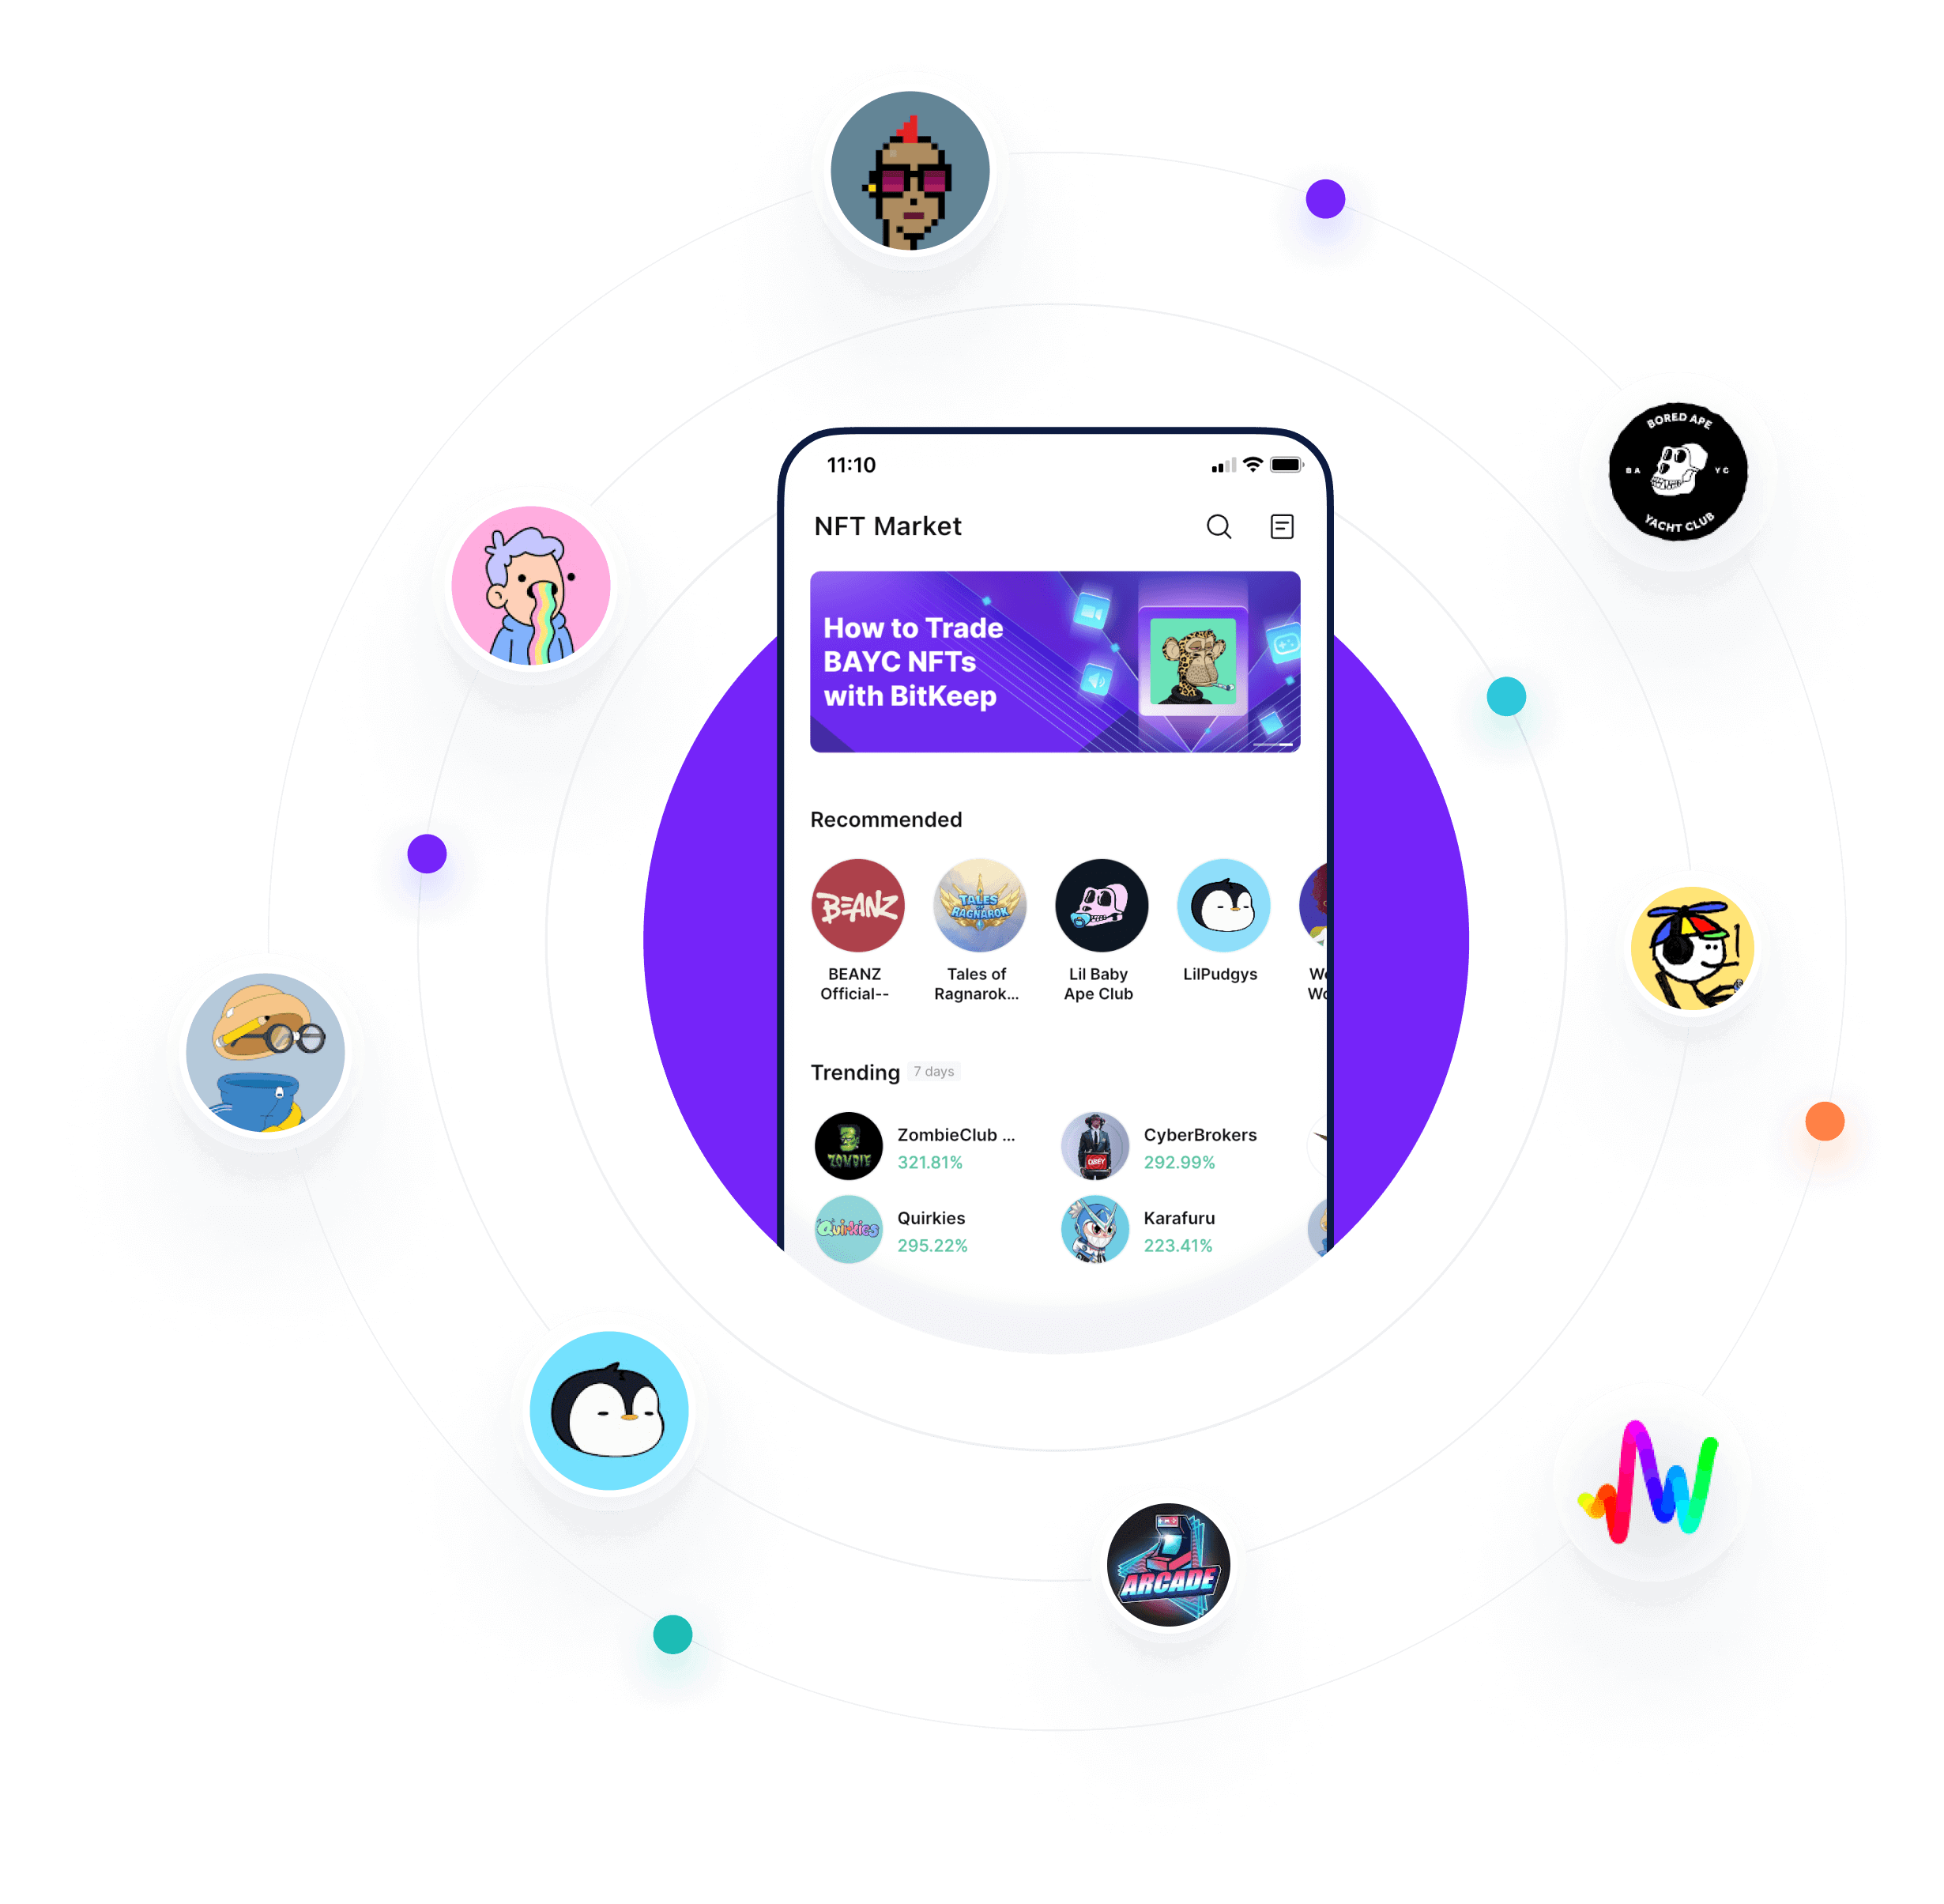 Bitkeep DApp store on laptop and mobile